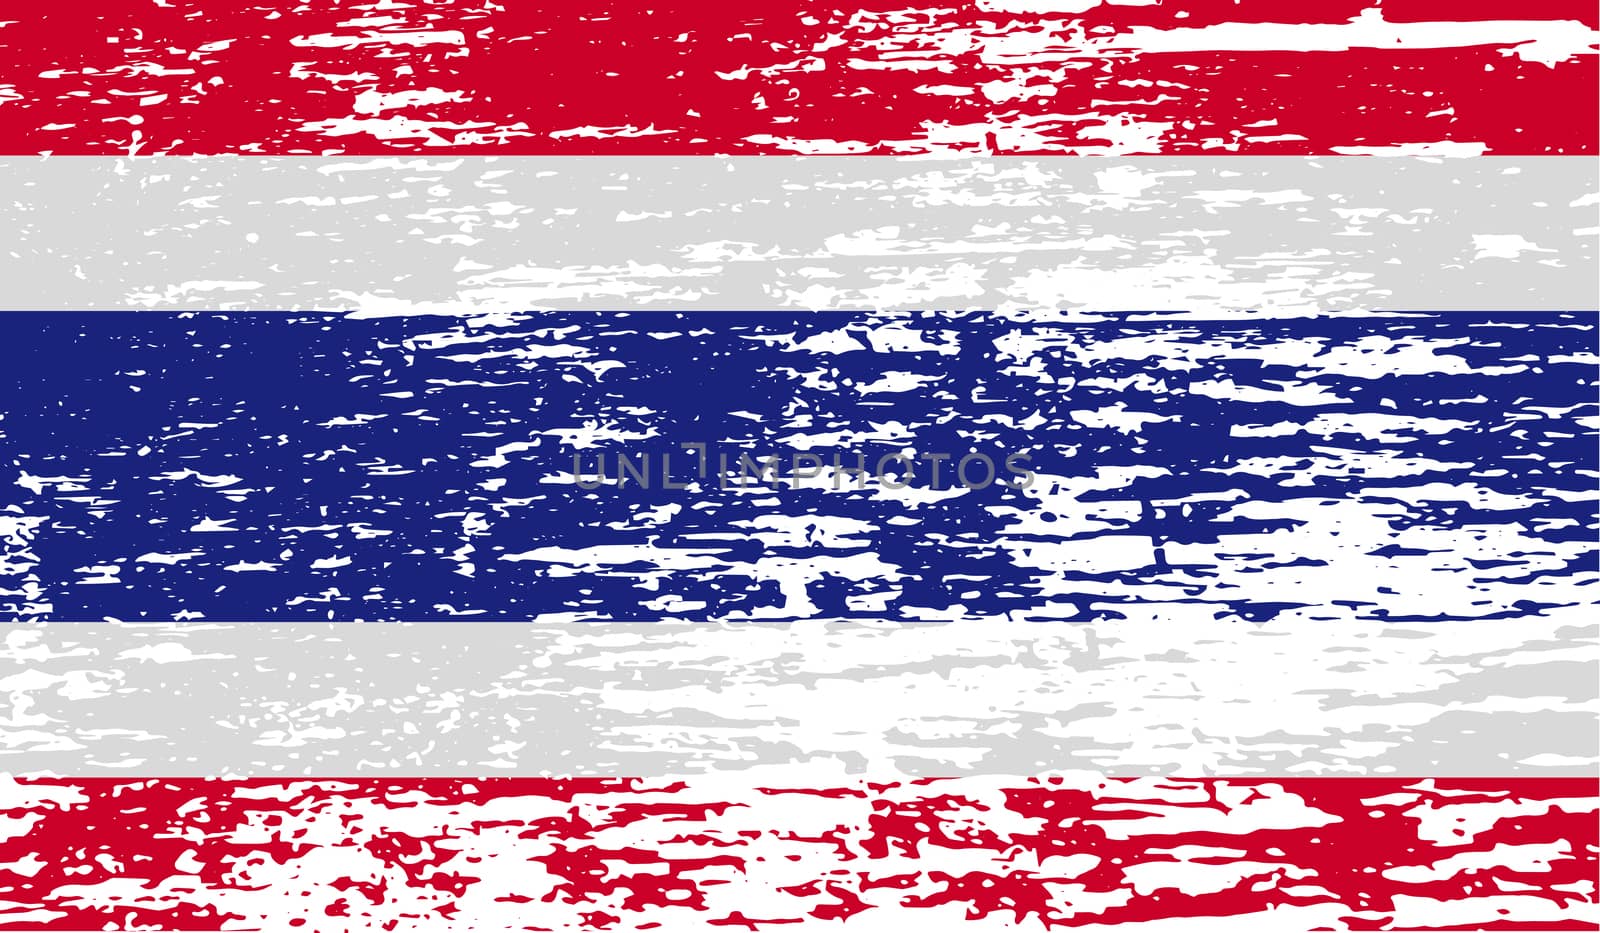 Flag of Thailand with old texture.  illustration